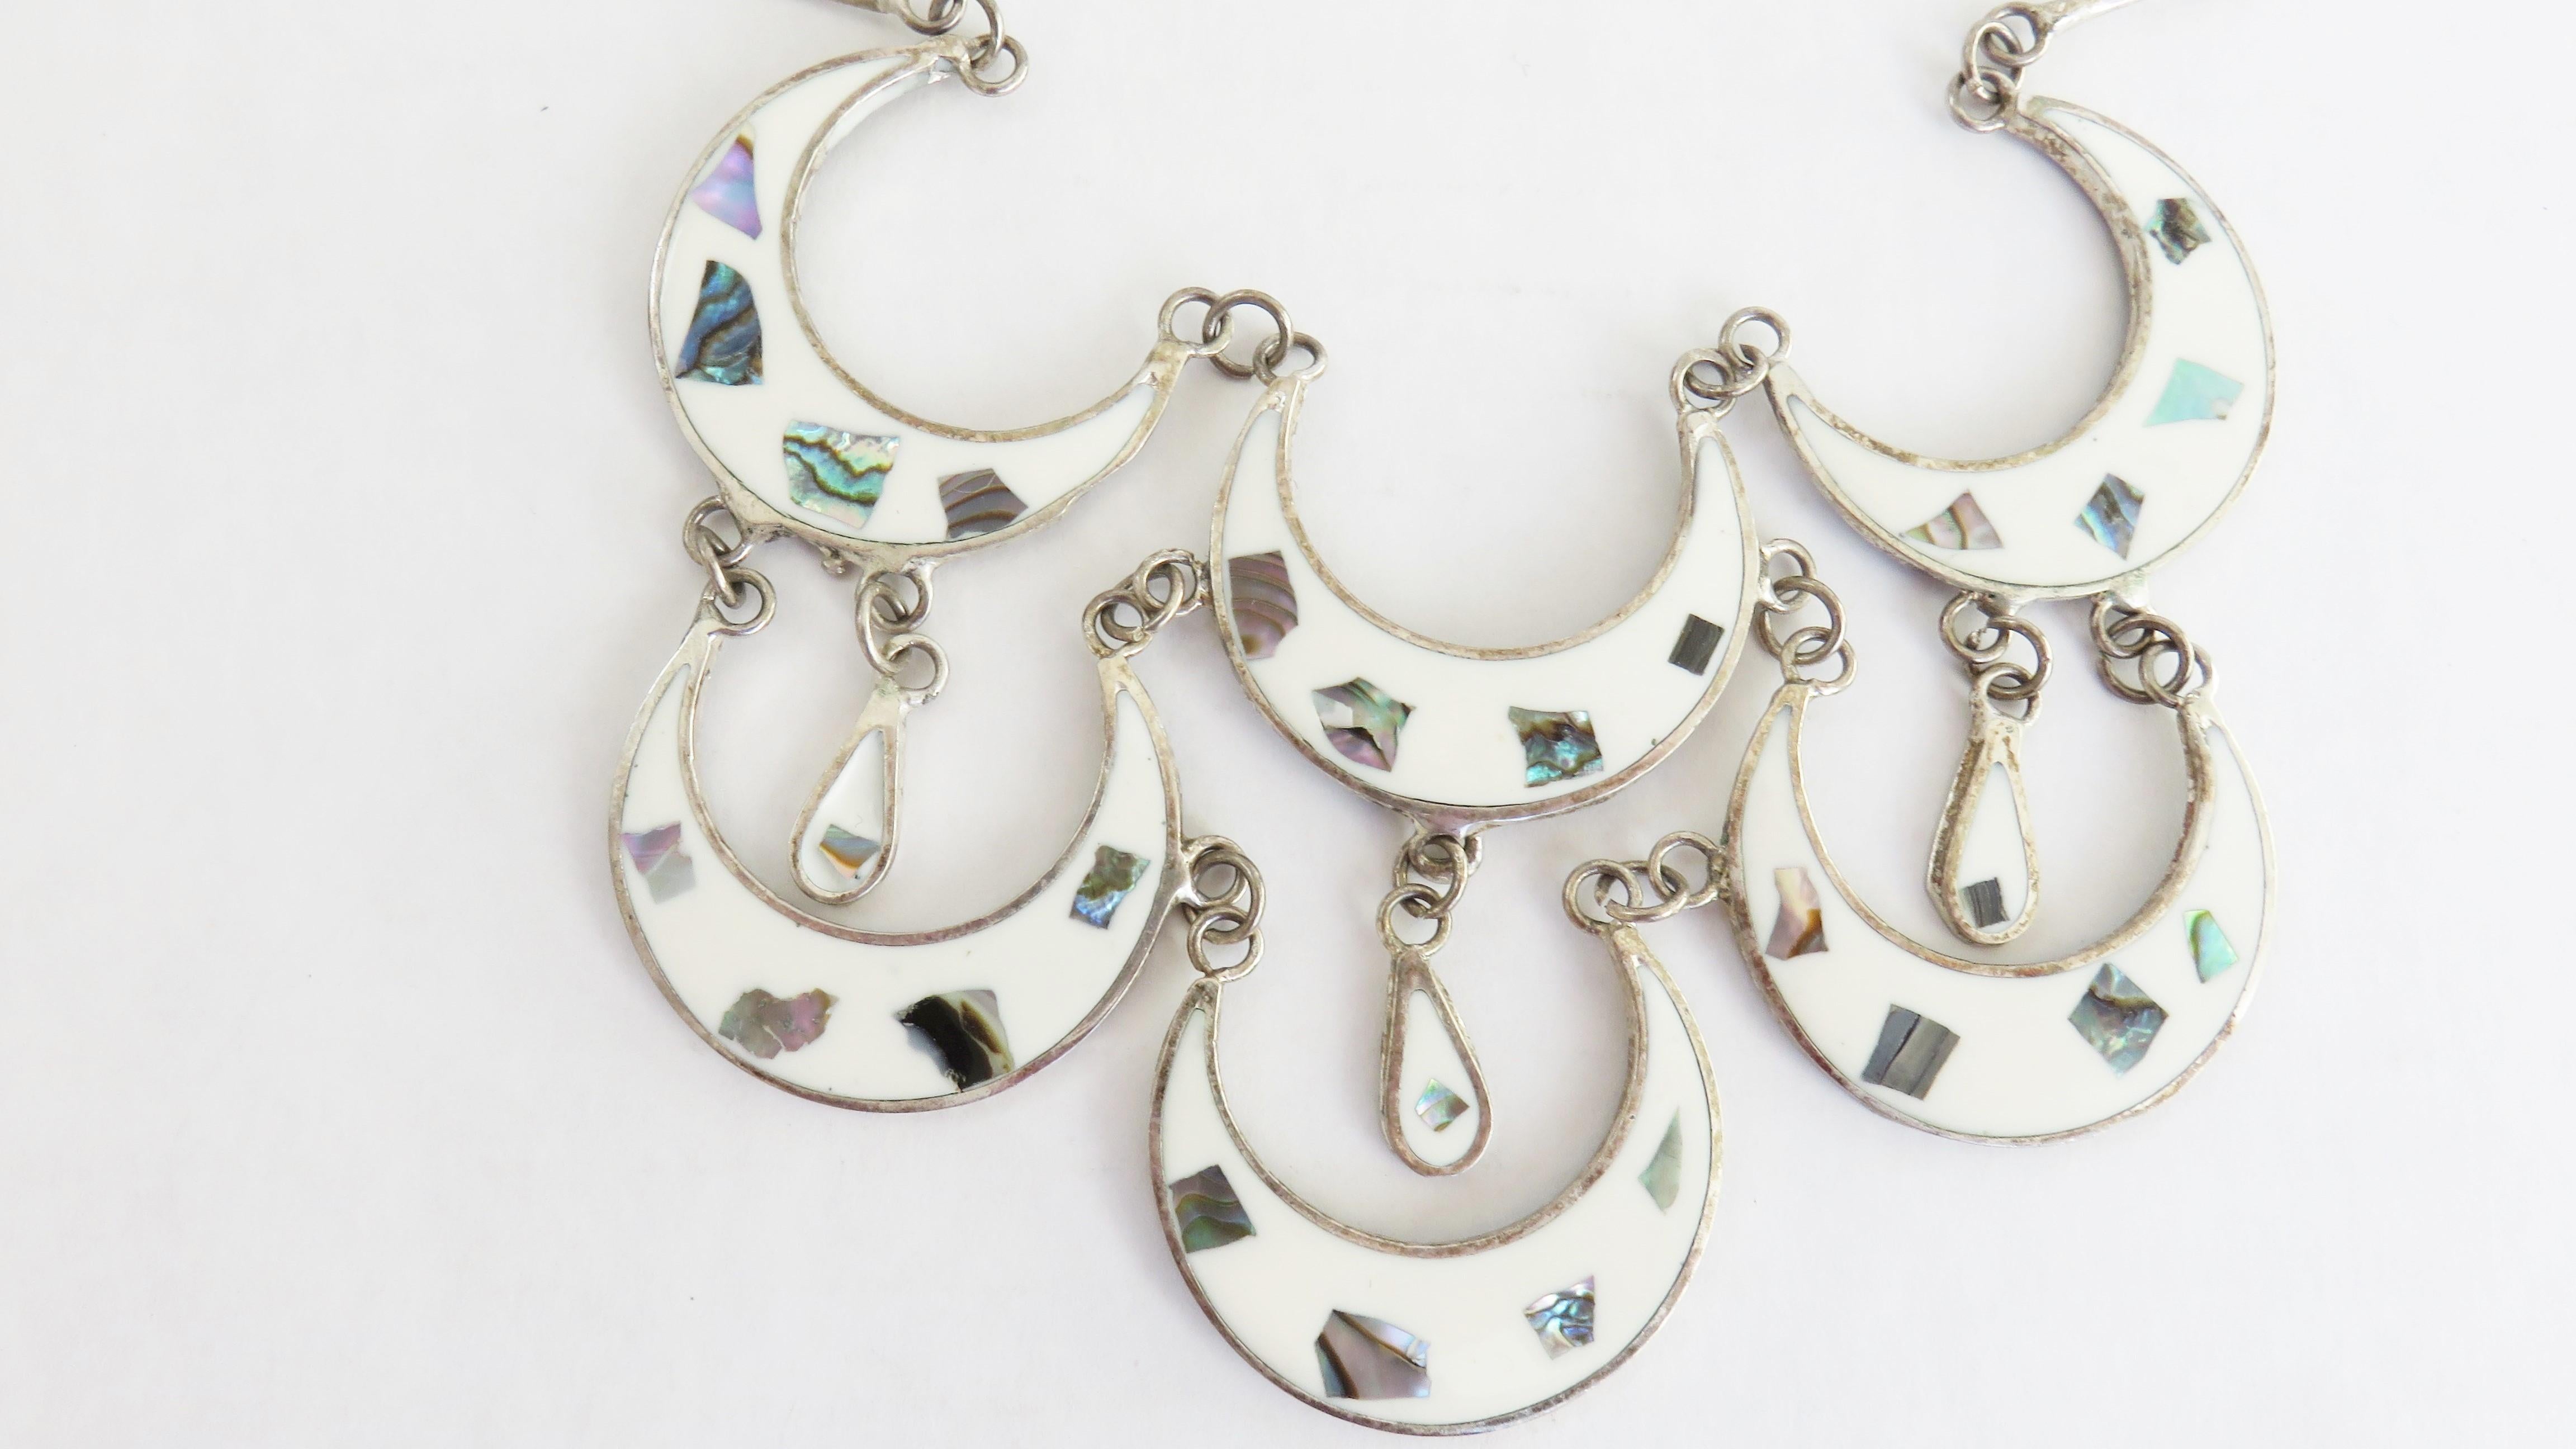 Mexican Abalone Inlaid Silver Necklace and Pierced Earrings Set For Sale 2